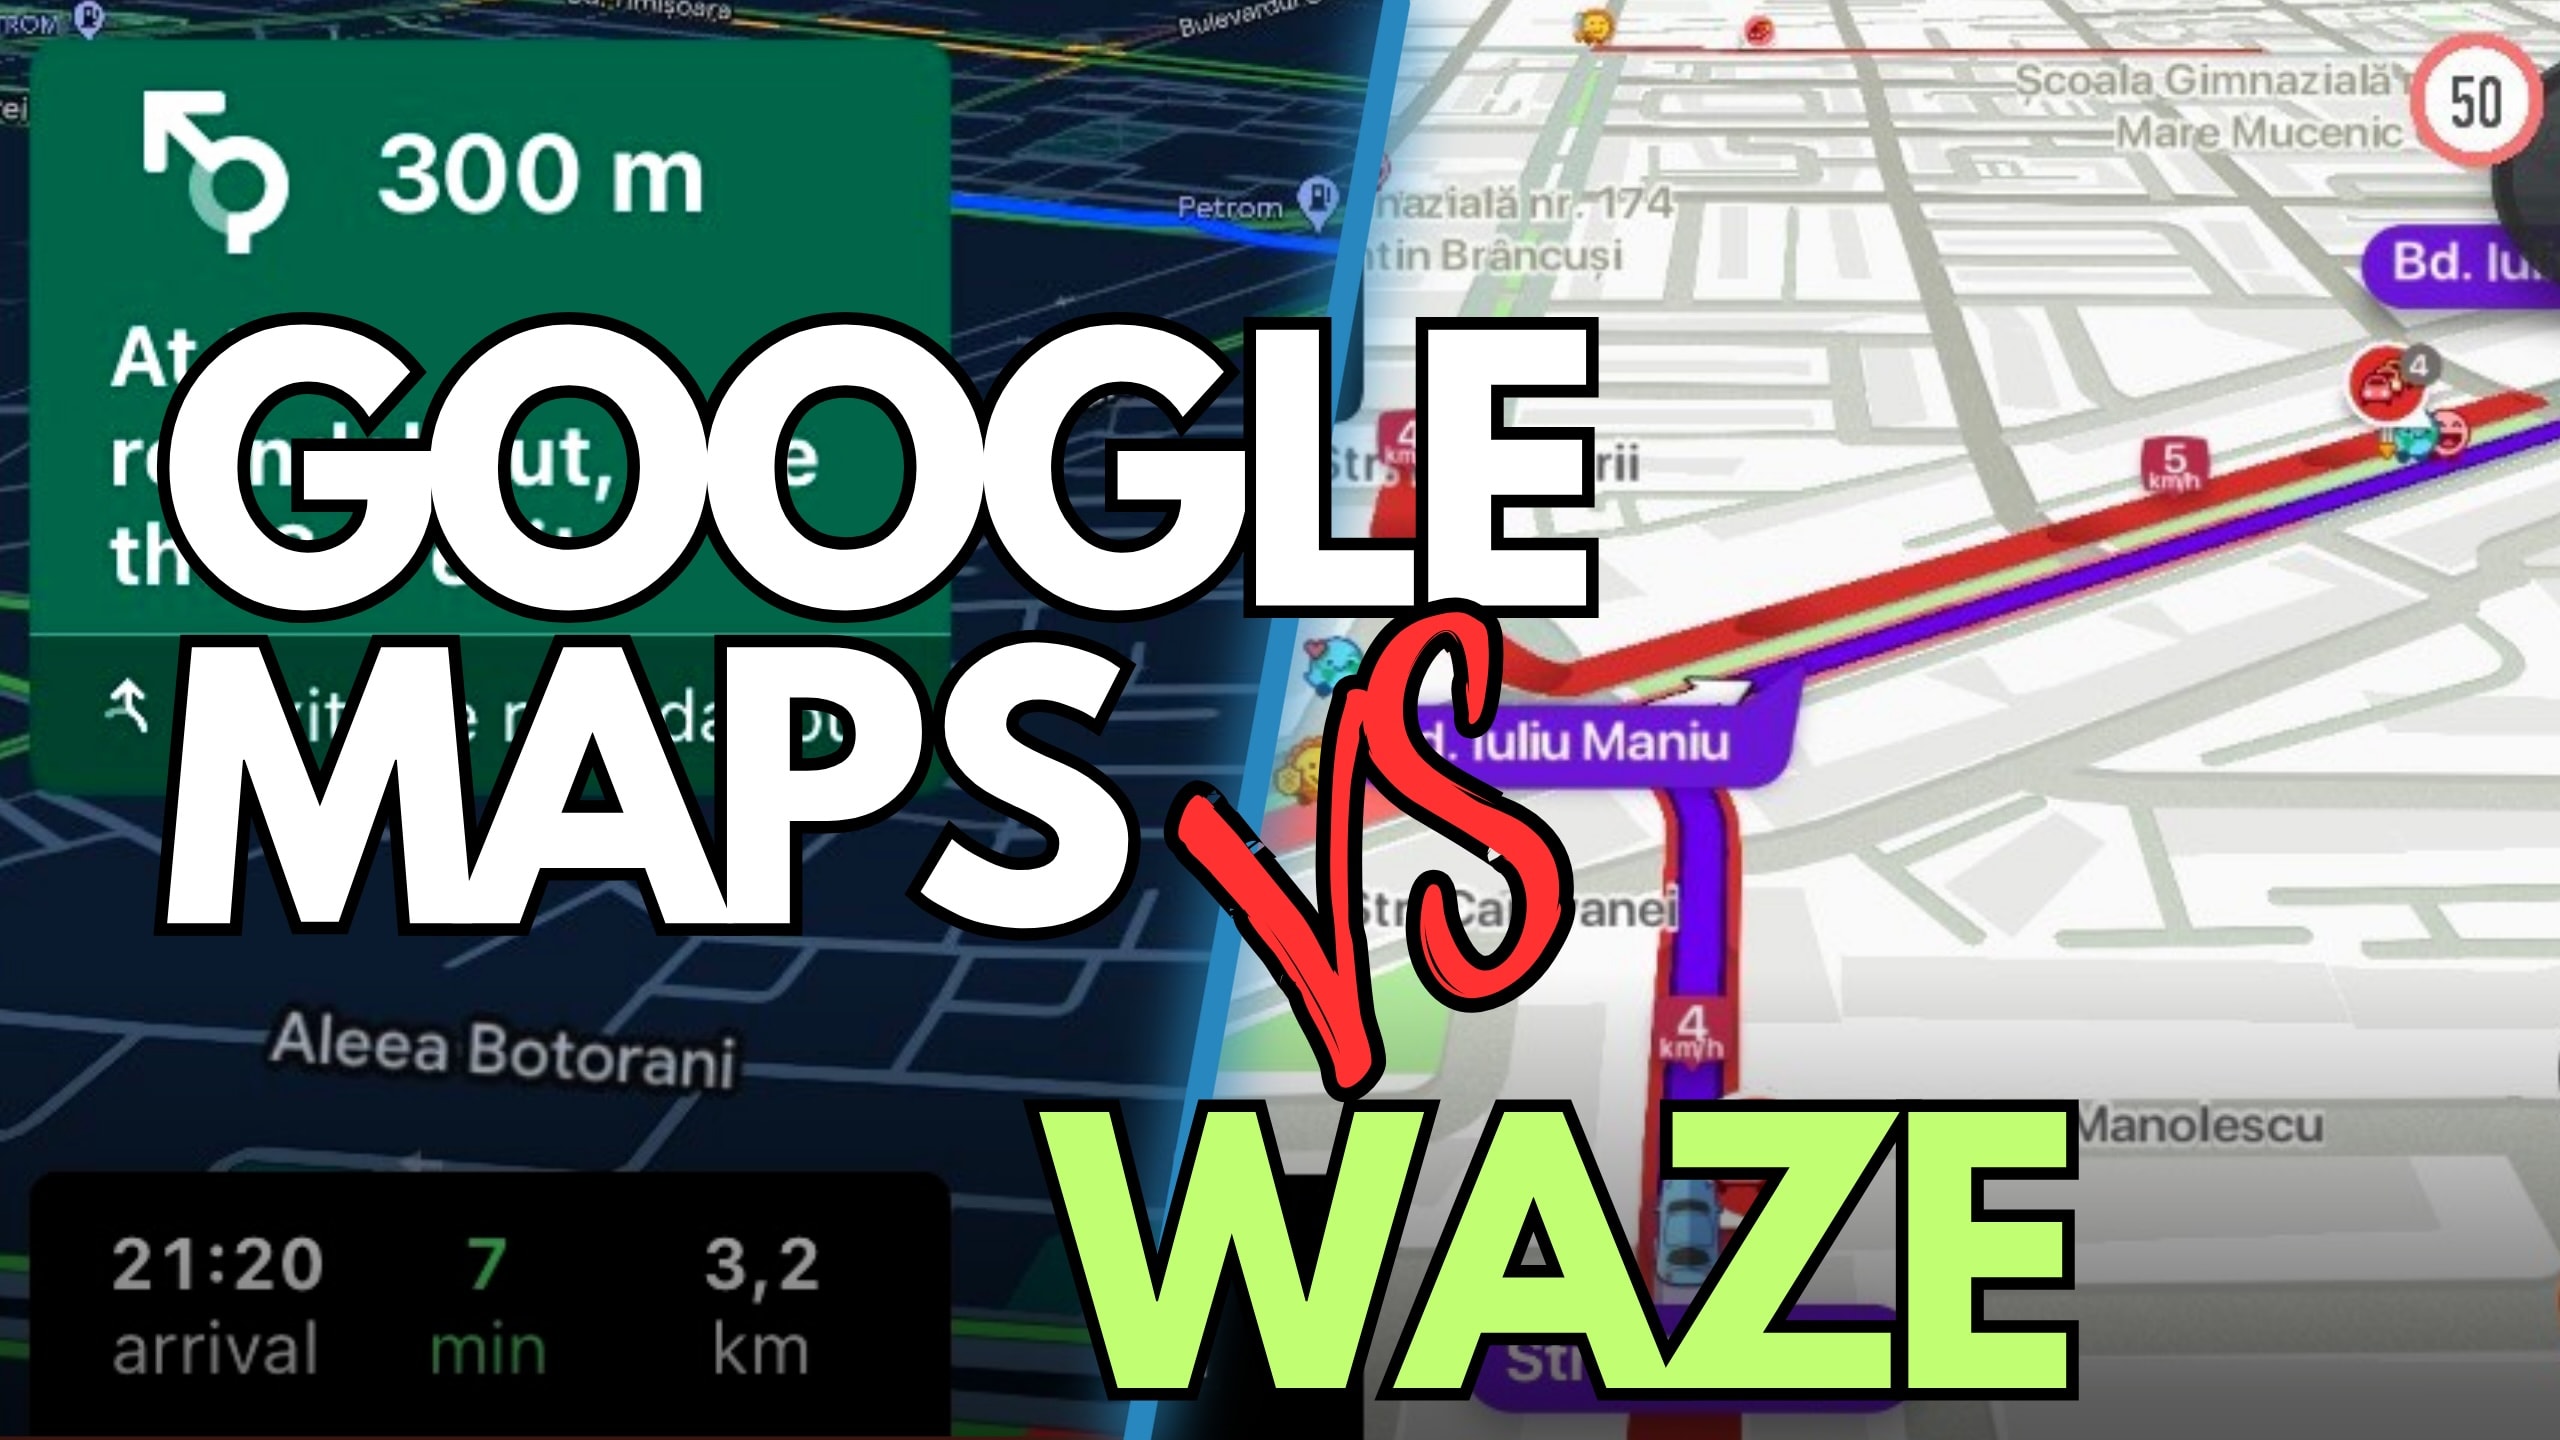 Why Waze cannot be a full-time Google Maps alternative